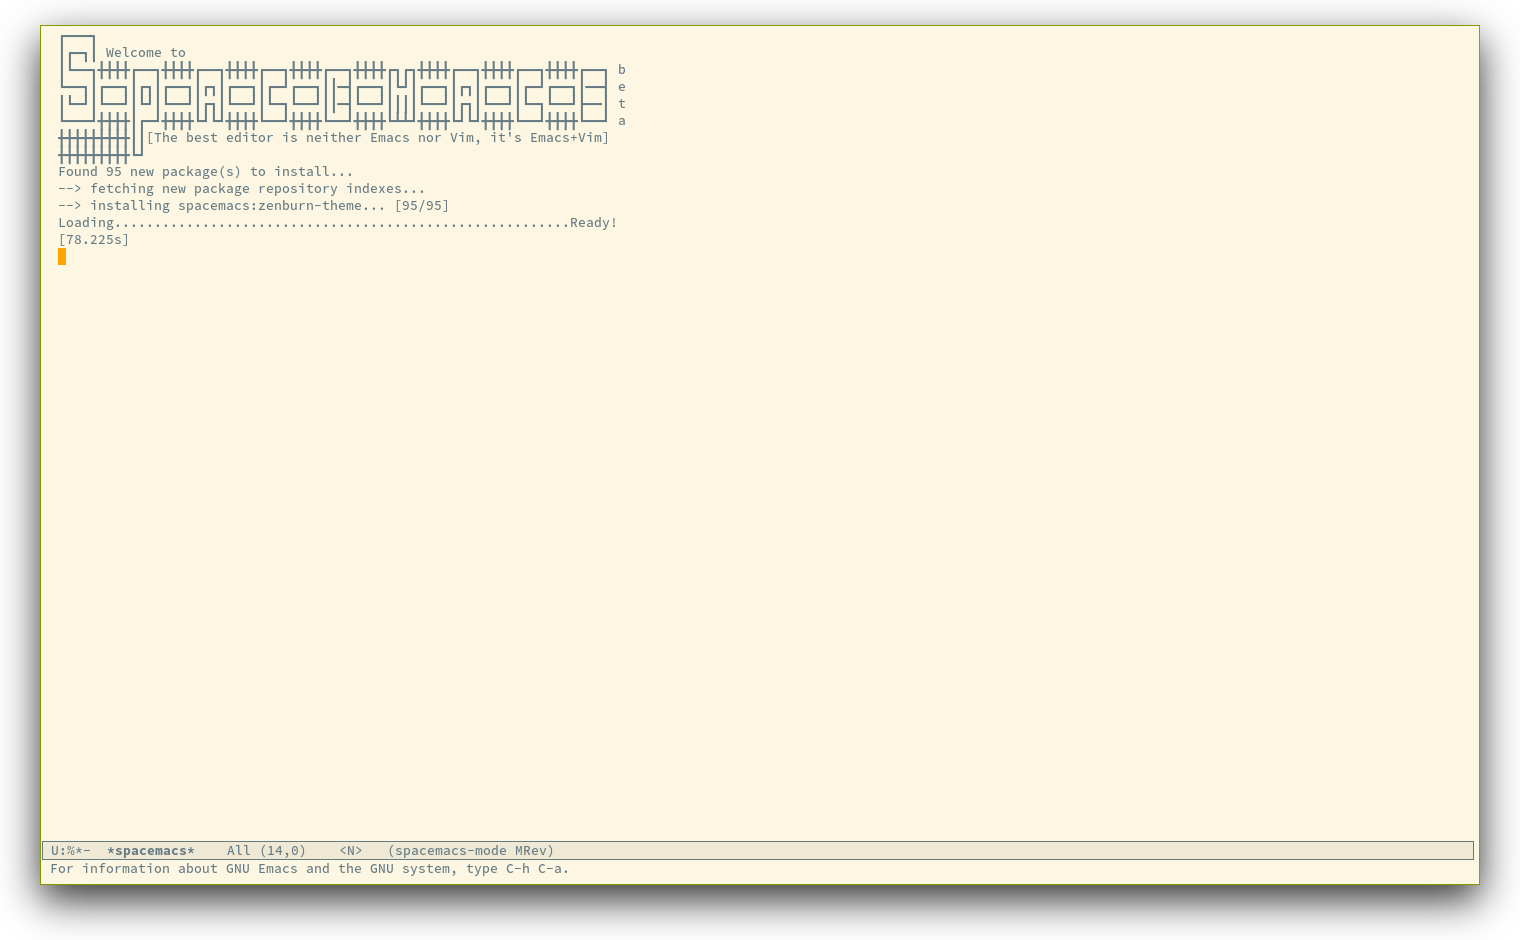 /TakeV/spacemacs/media/commit/d14f10e47d55a27c8b762df505455706ebac096b/doc/img/spacemacs-startup.png